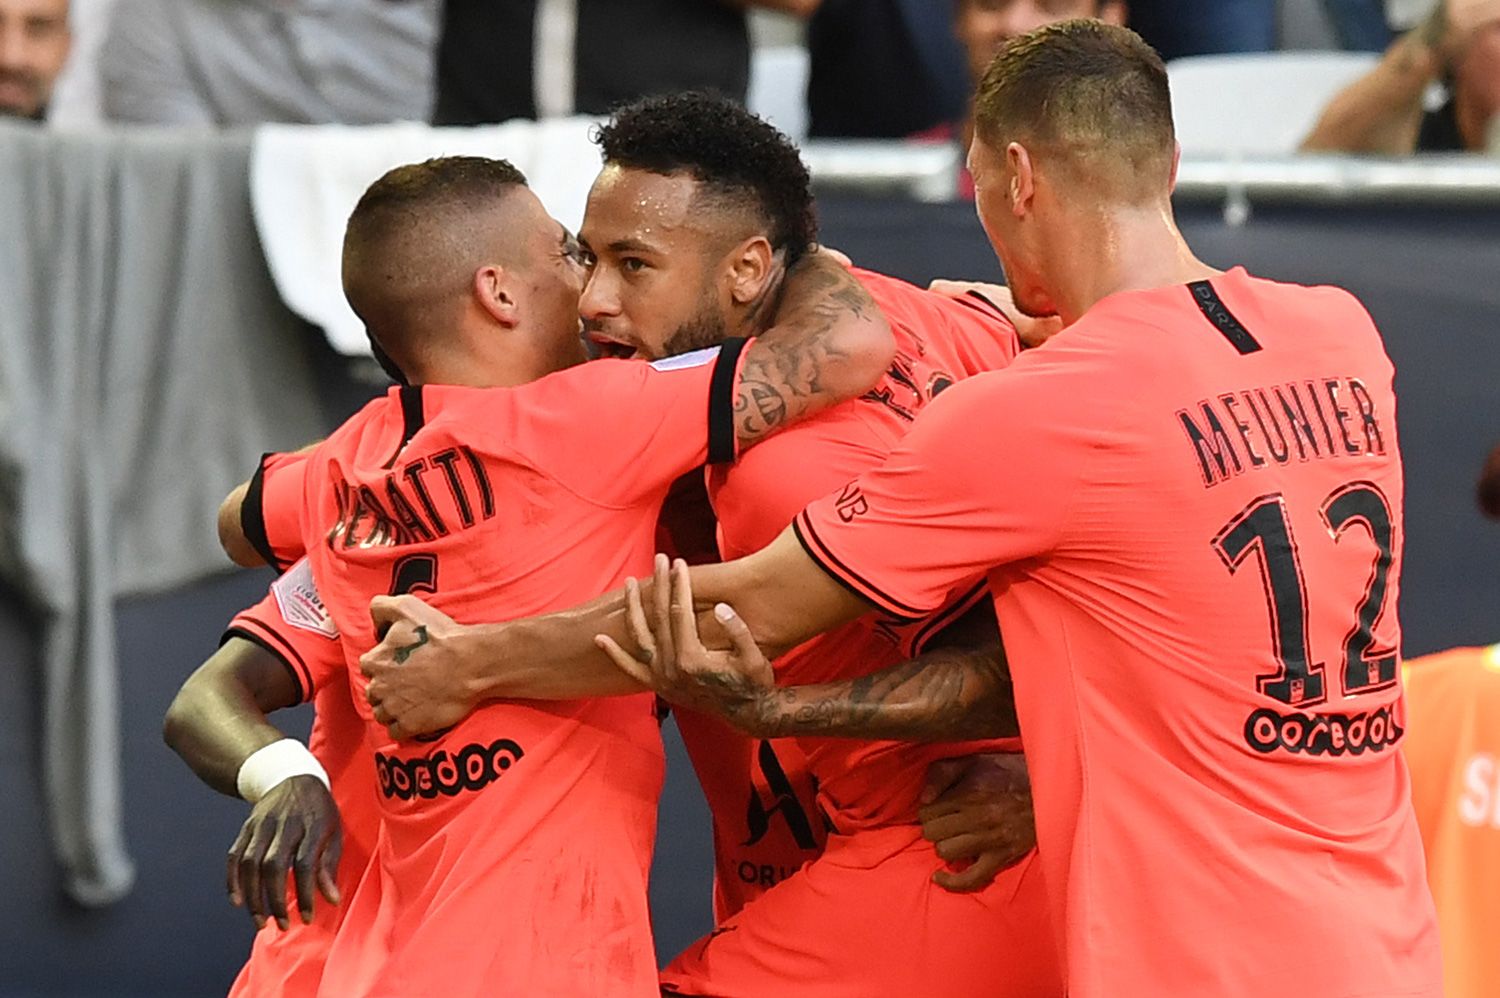 The players of the PSG celebrate the goal of Neymar